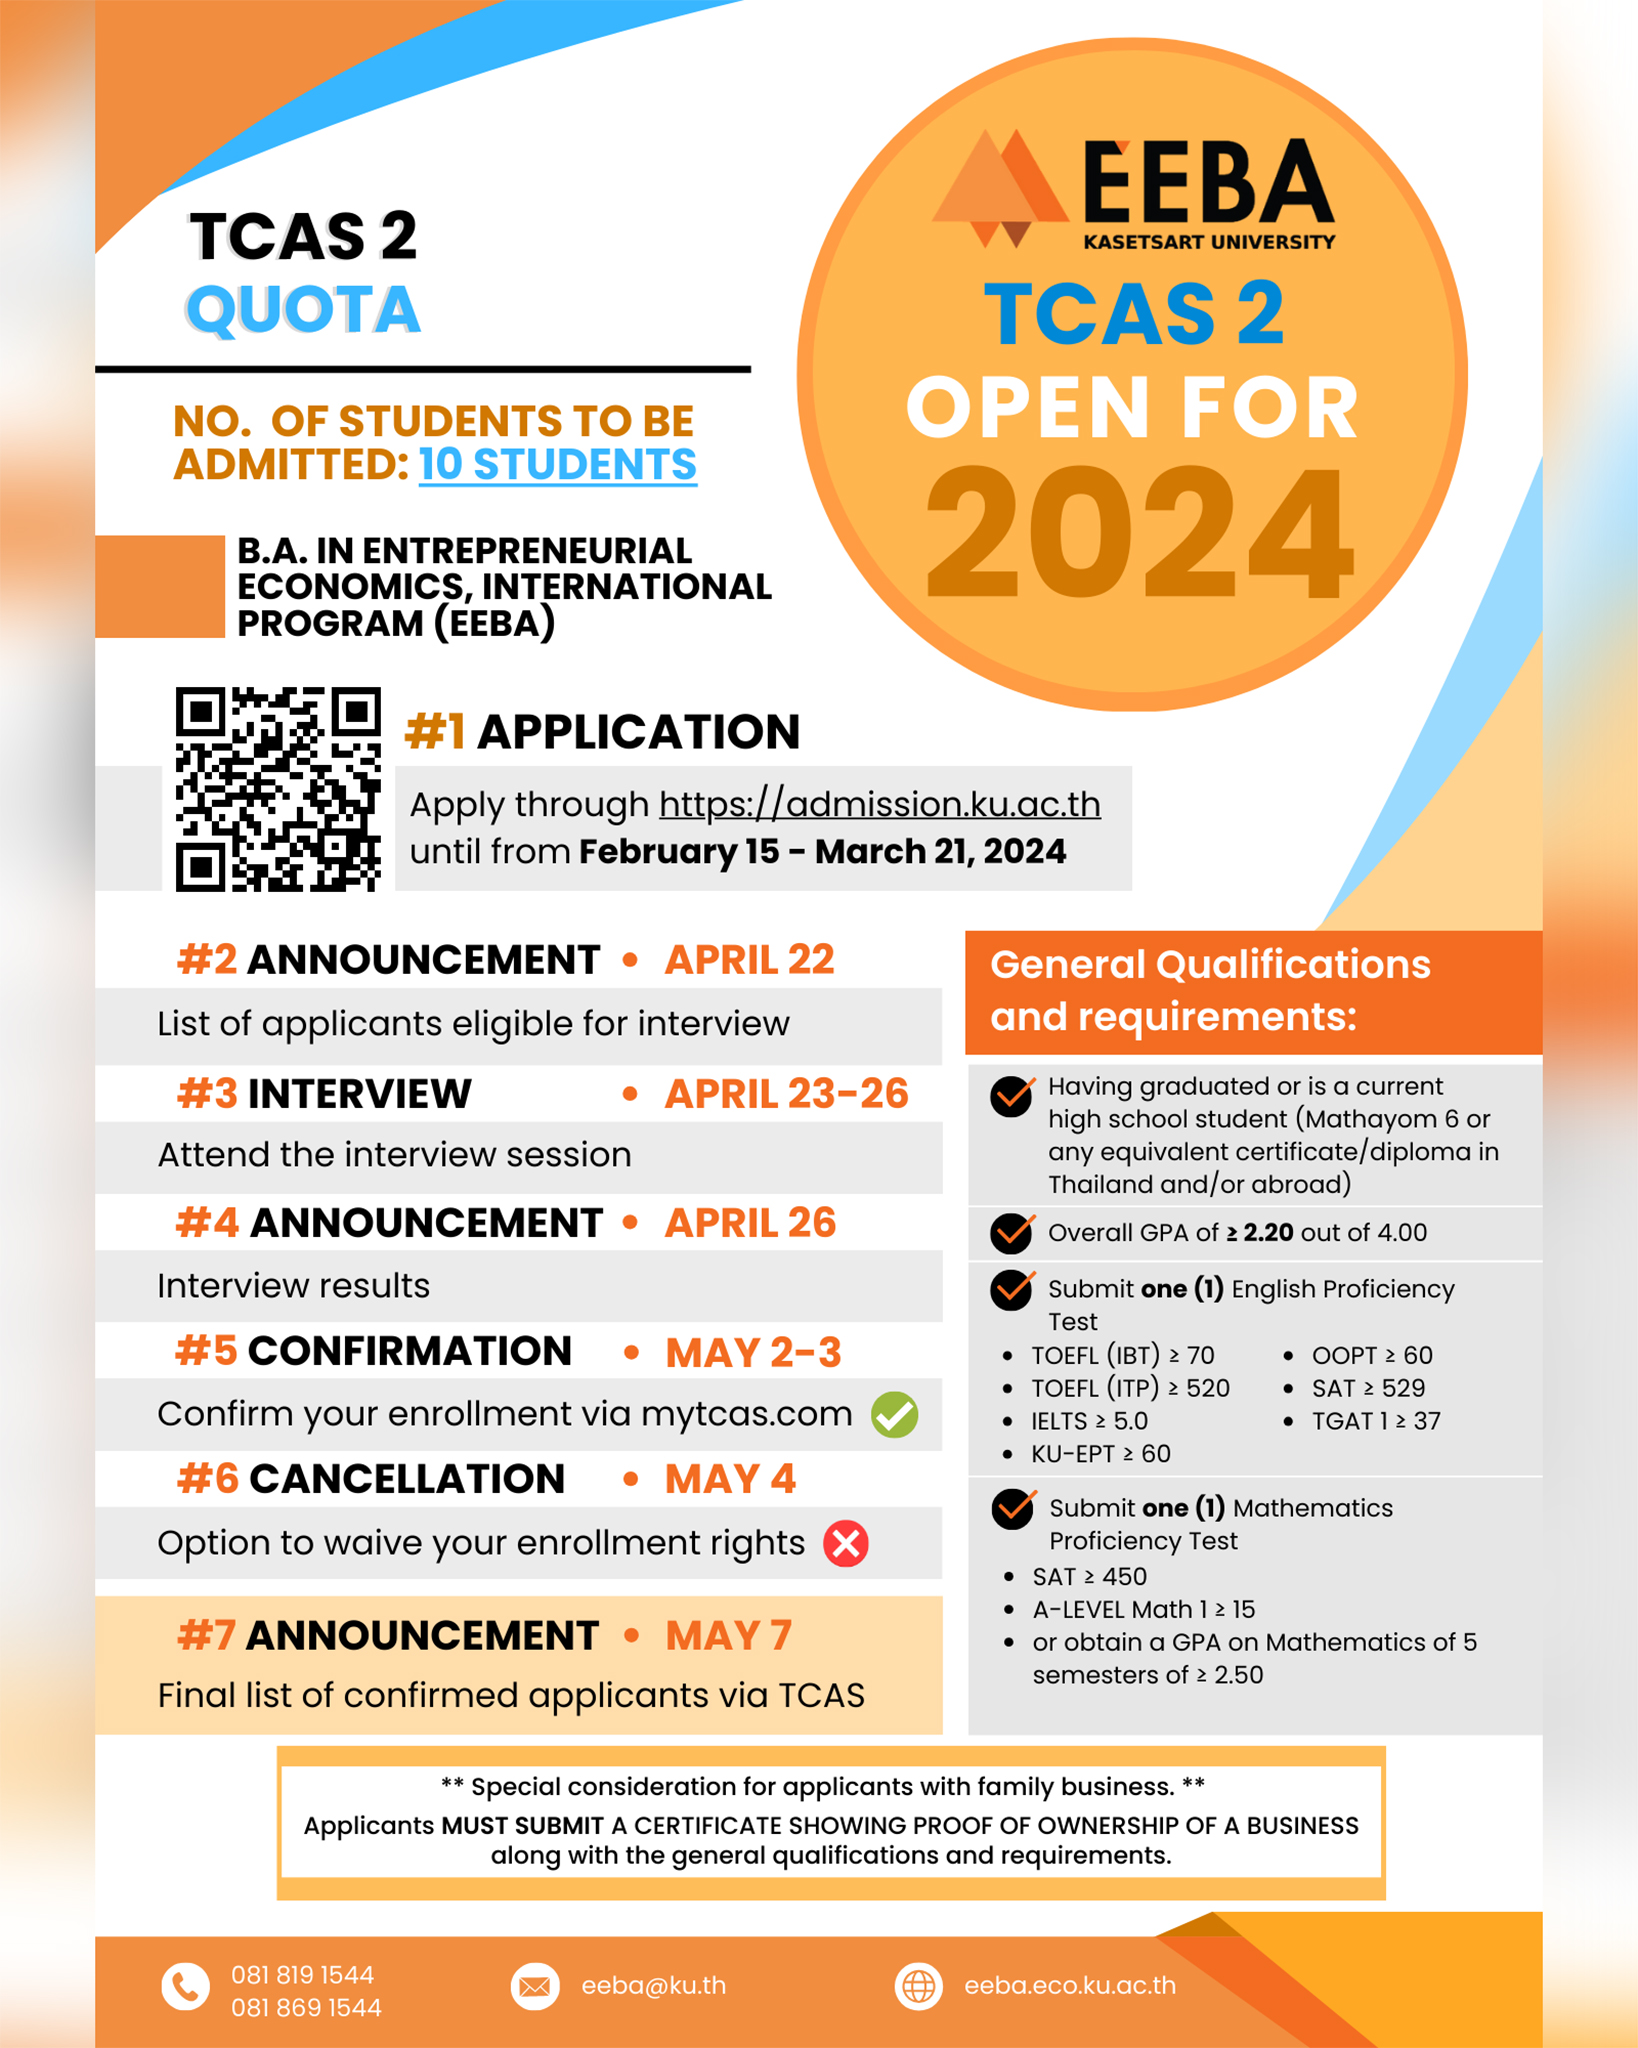 EEBA TCAS67 Round 2: The Application period, Qualifications, and Requirements